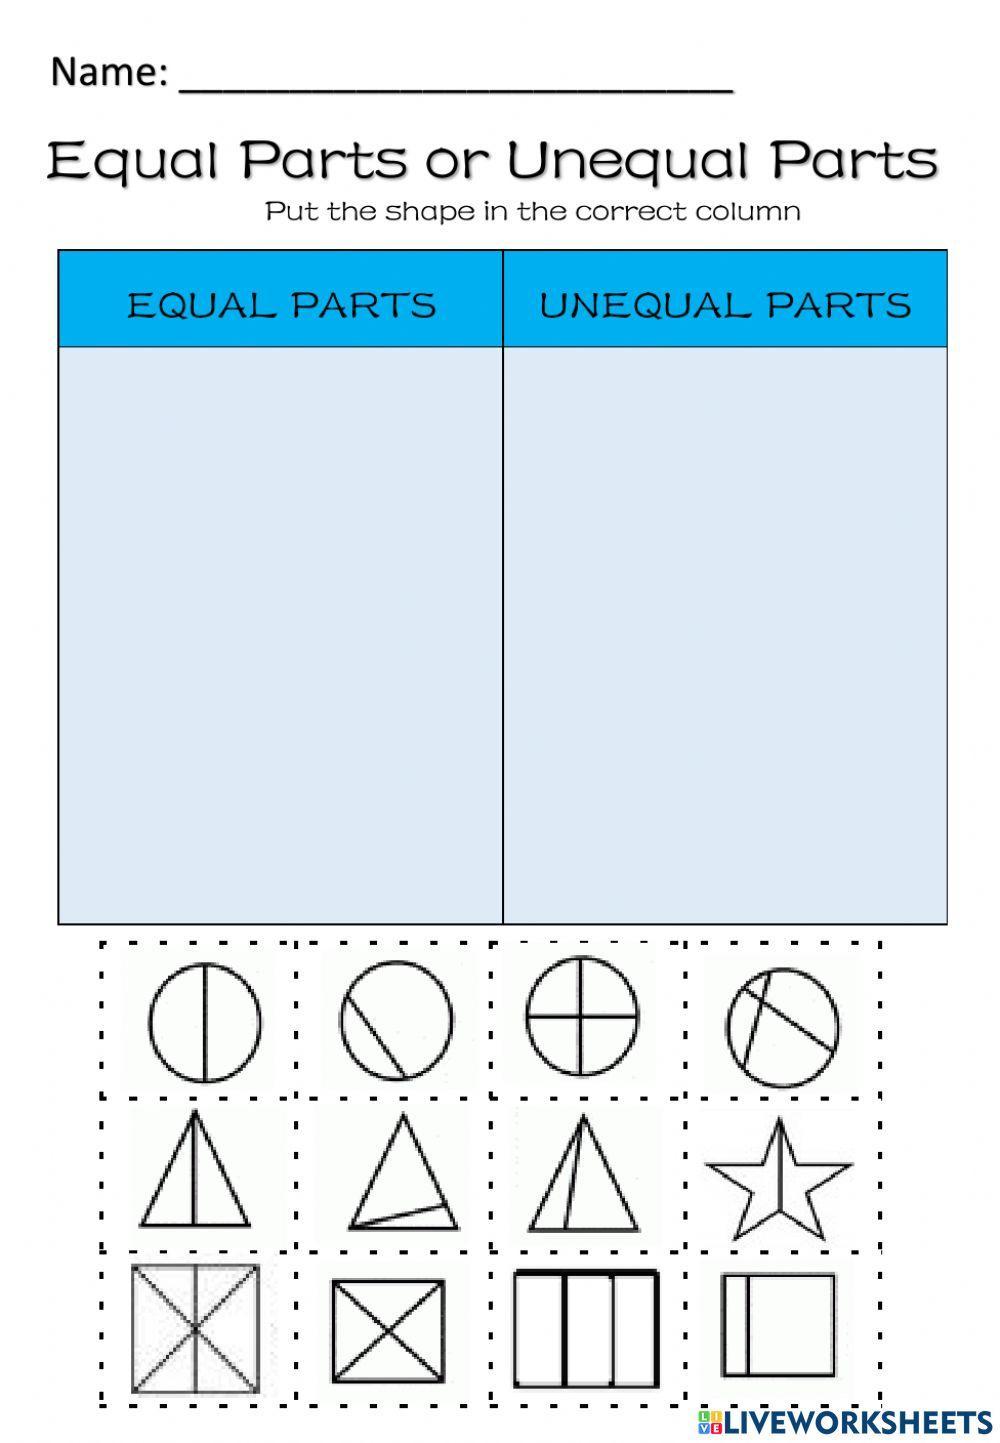 Equal and Unequal Parts